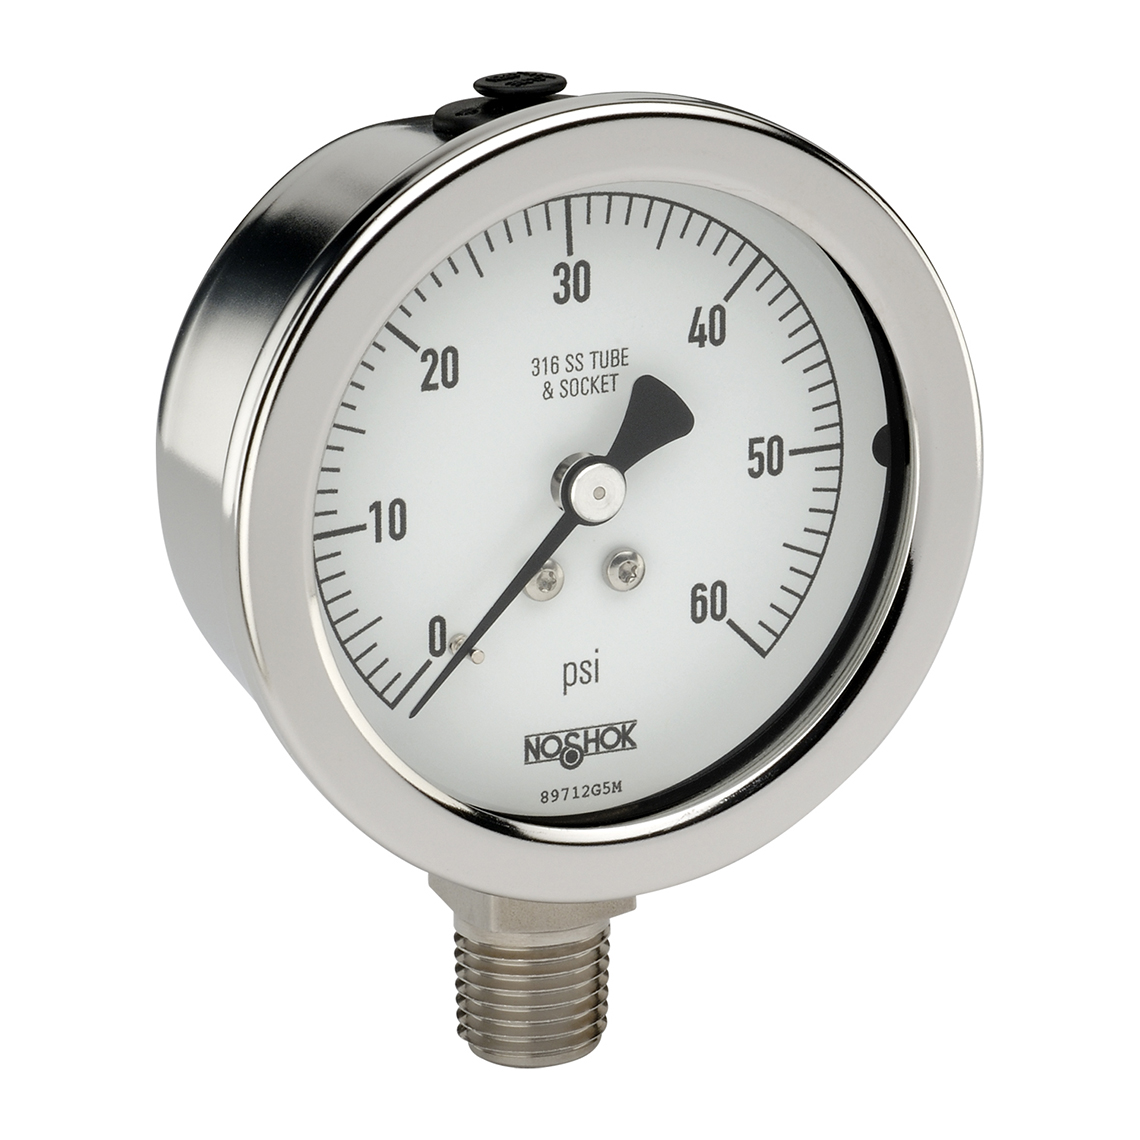 25-400-30-vac 400/500 Series All Stainless Steel Dry and Liquid Filled Pressure Gauges